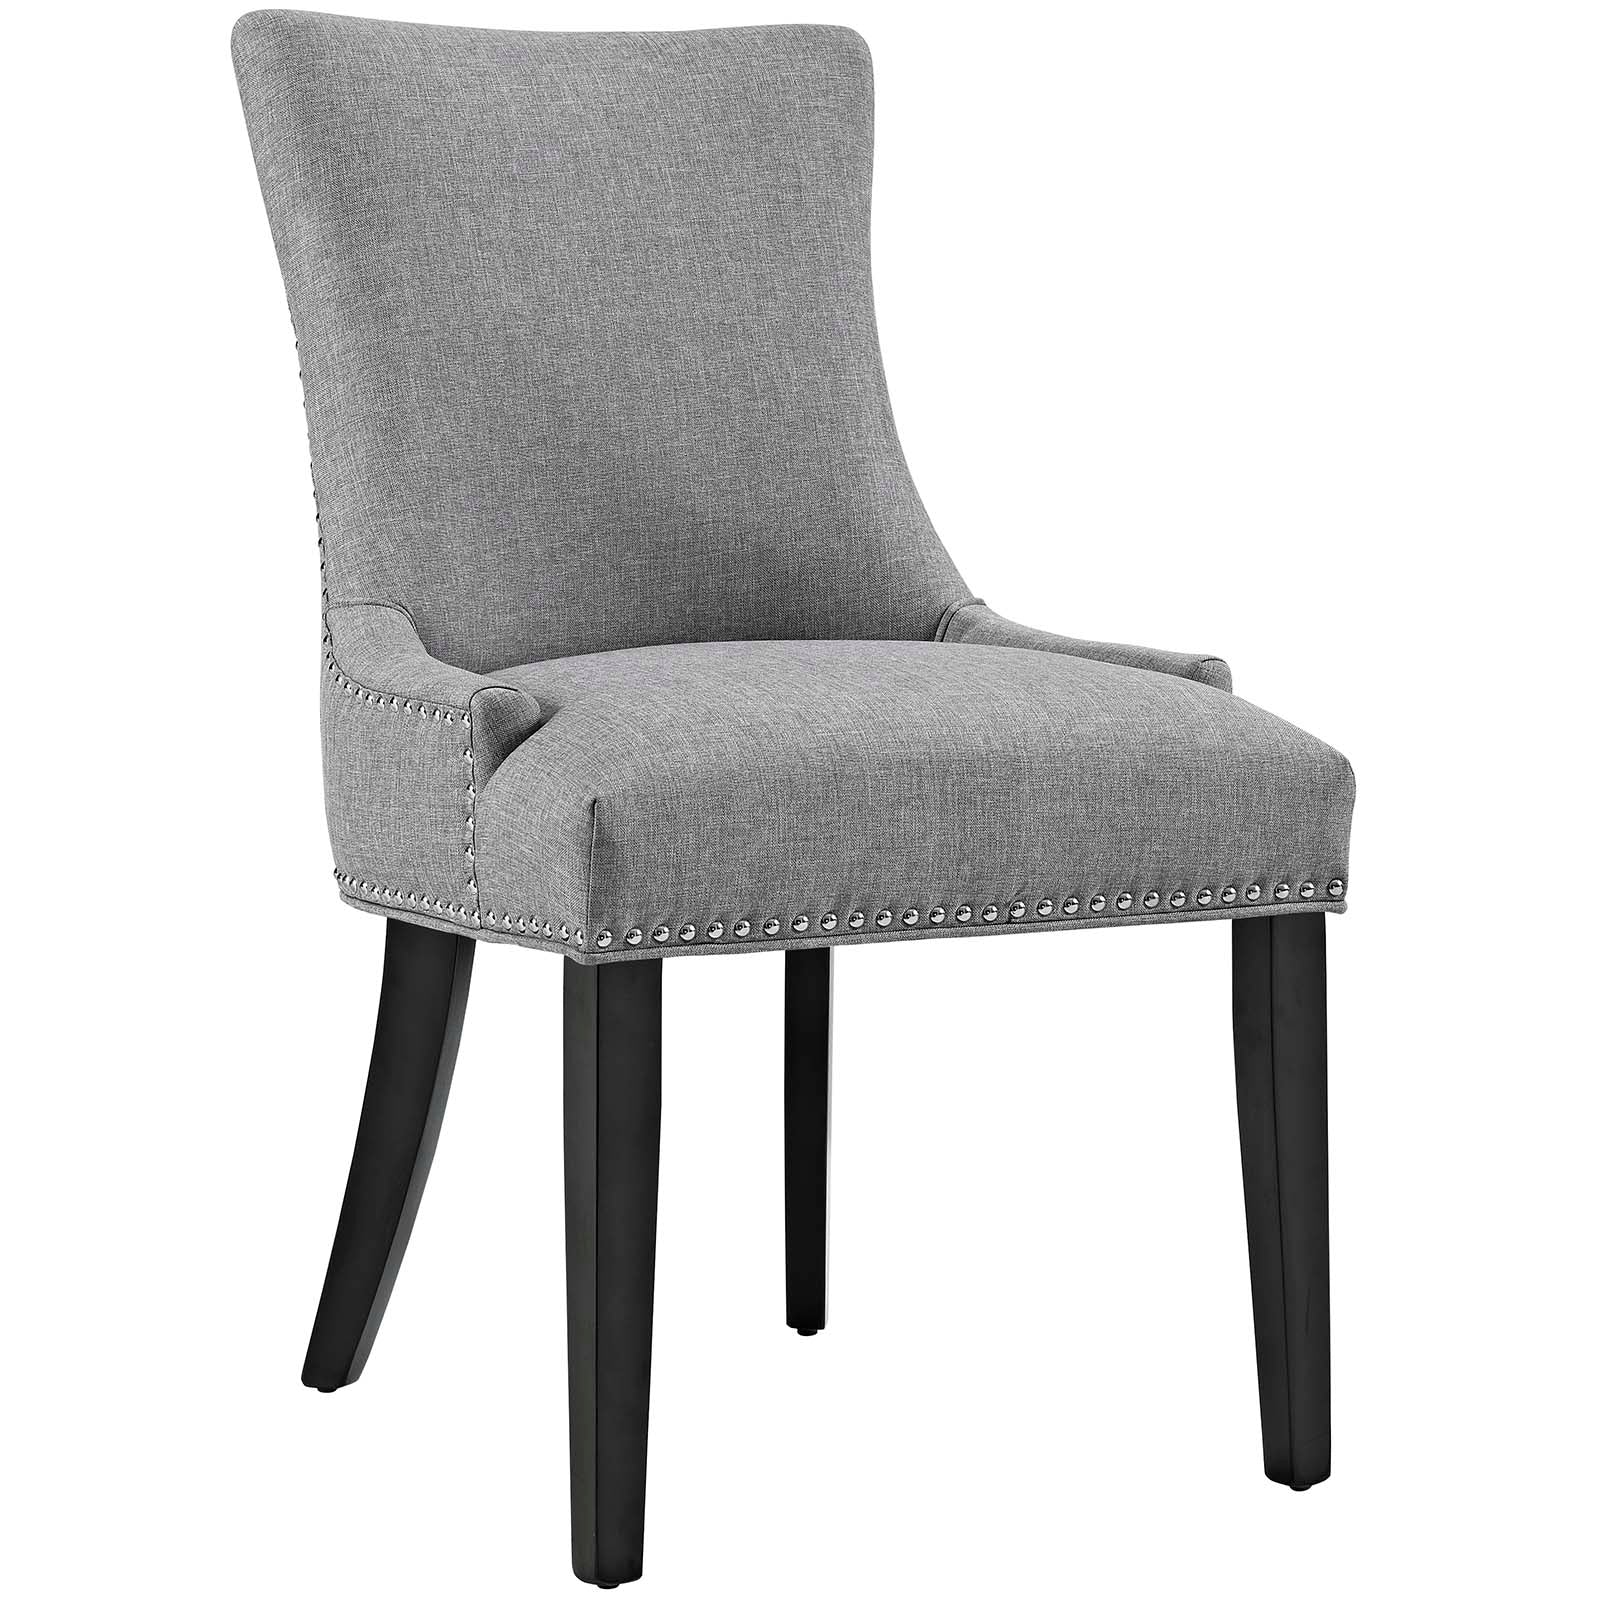 Modway Dining Chairs - Marquis Dining Chair Fabric Light Gray (Set of 4)